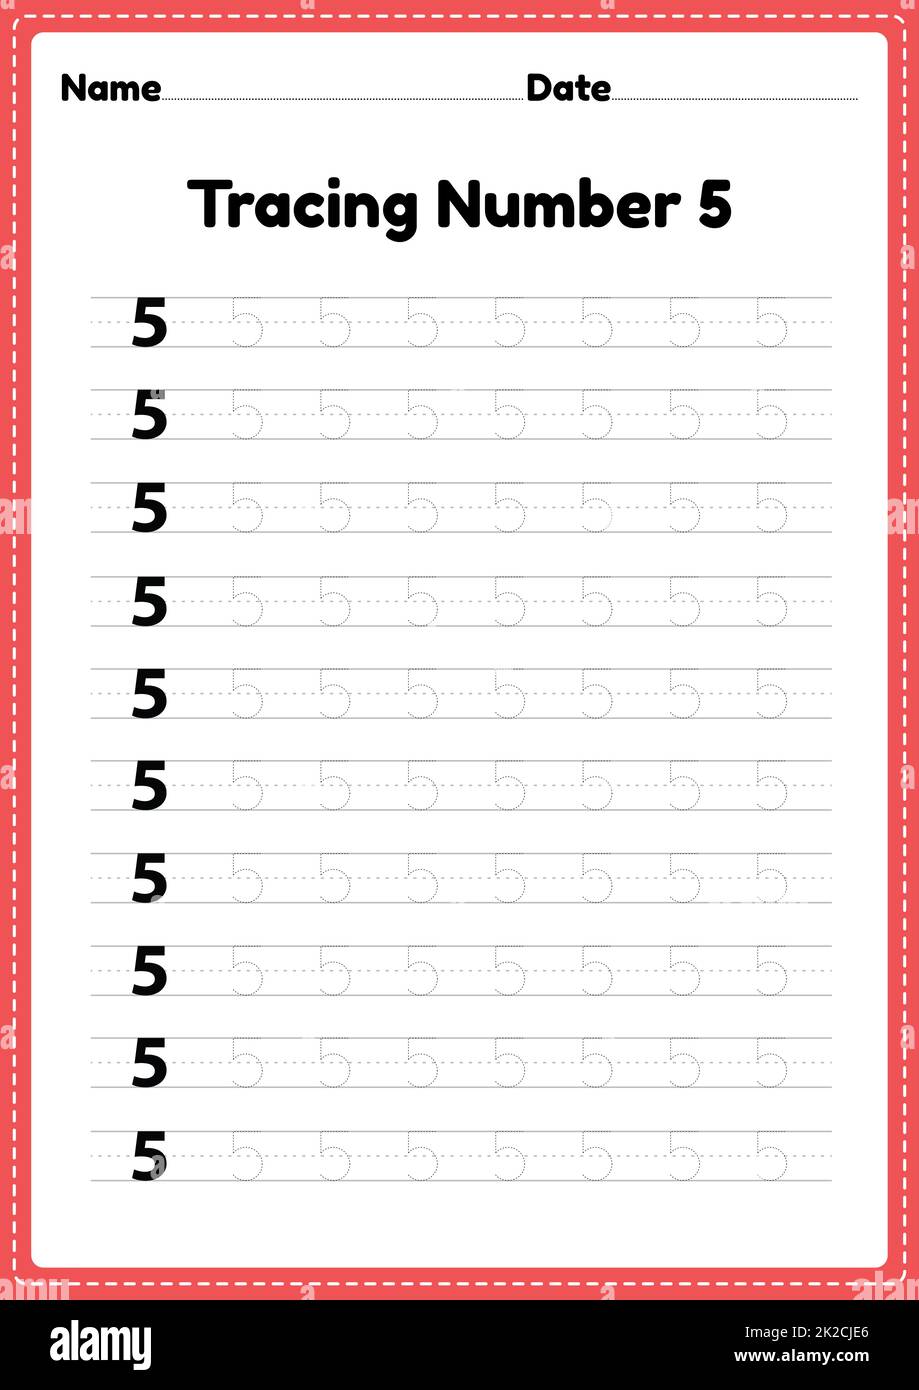 Tracing number 5 worksheet for kindergarten and preschool kids for educational handwriting practice in a printable page. Stock Photo